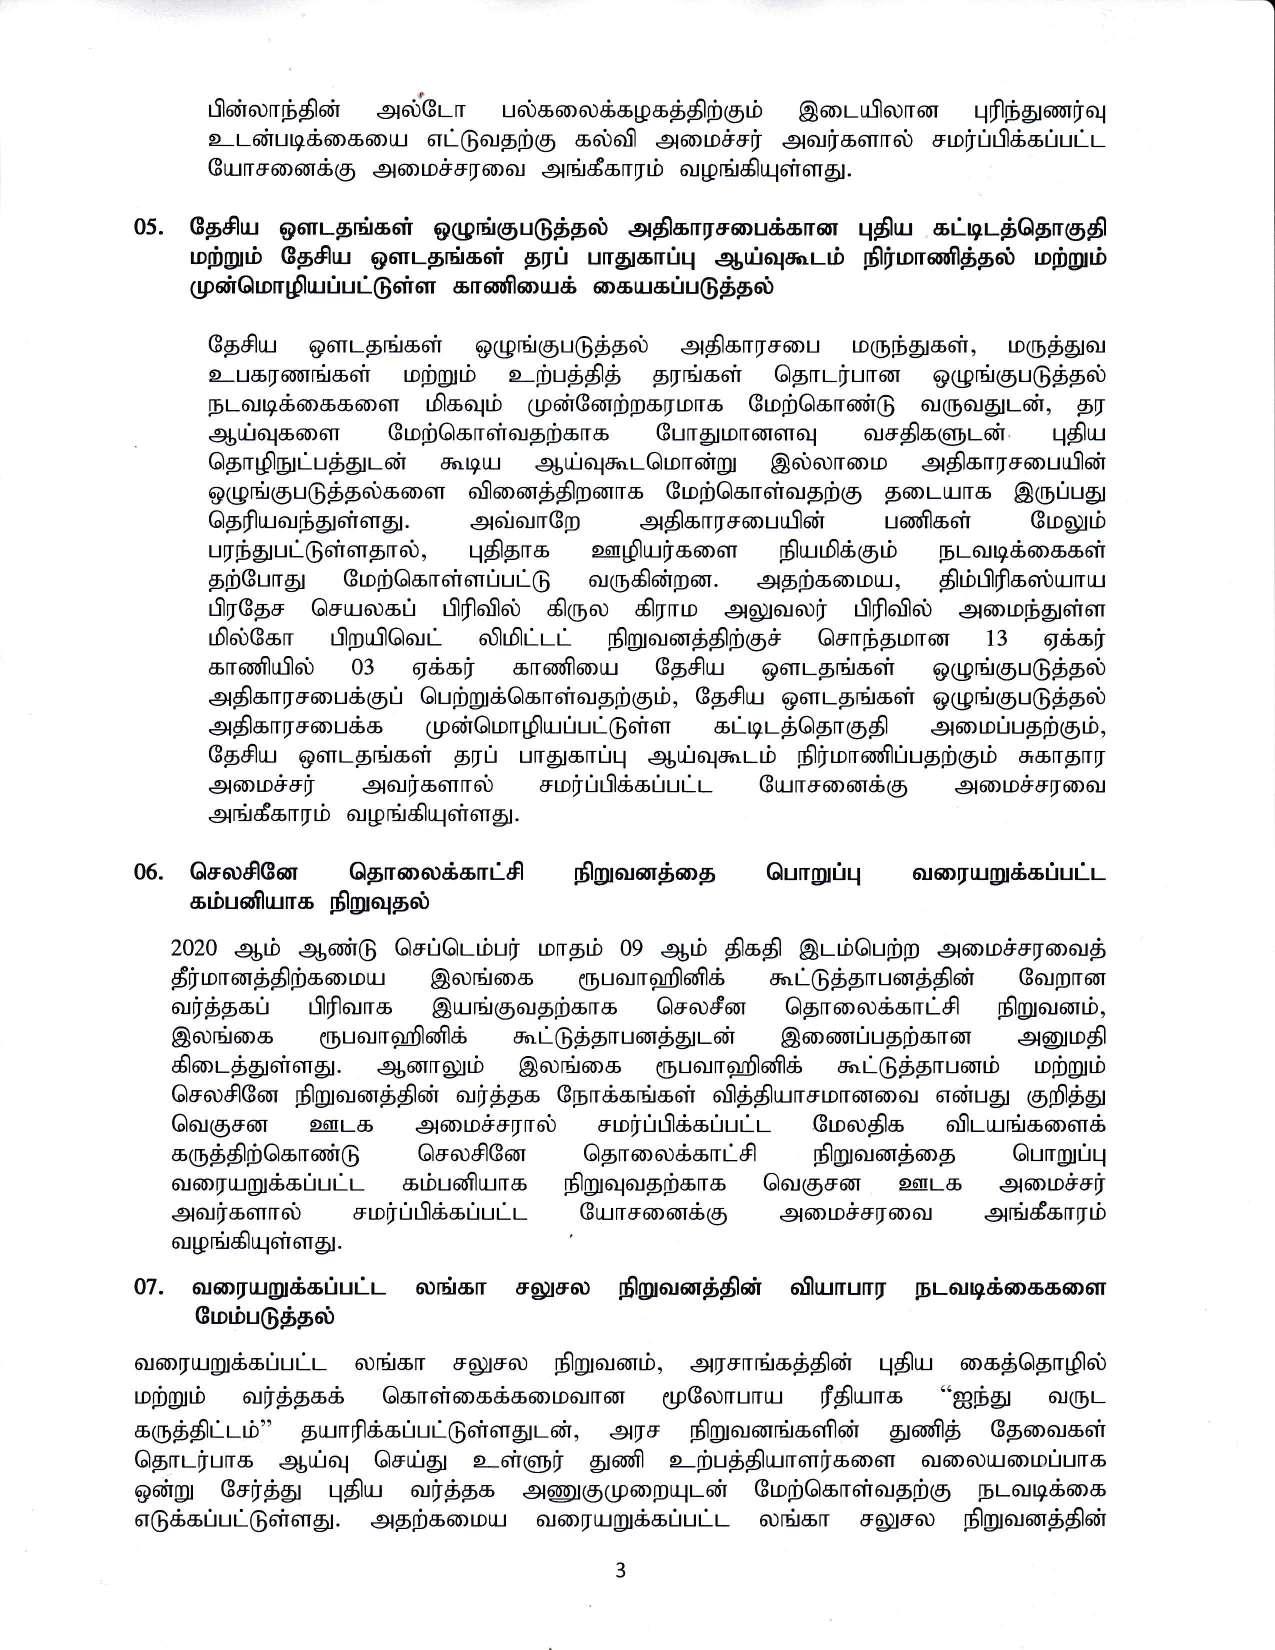 Cabinet Decision on 19.10.2020 Tamil compressed page 003